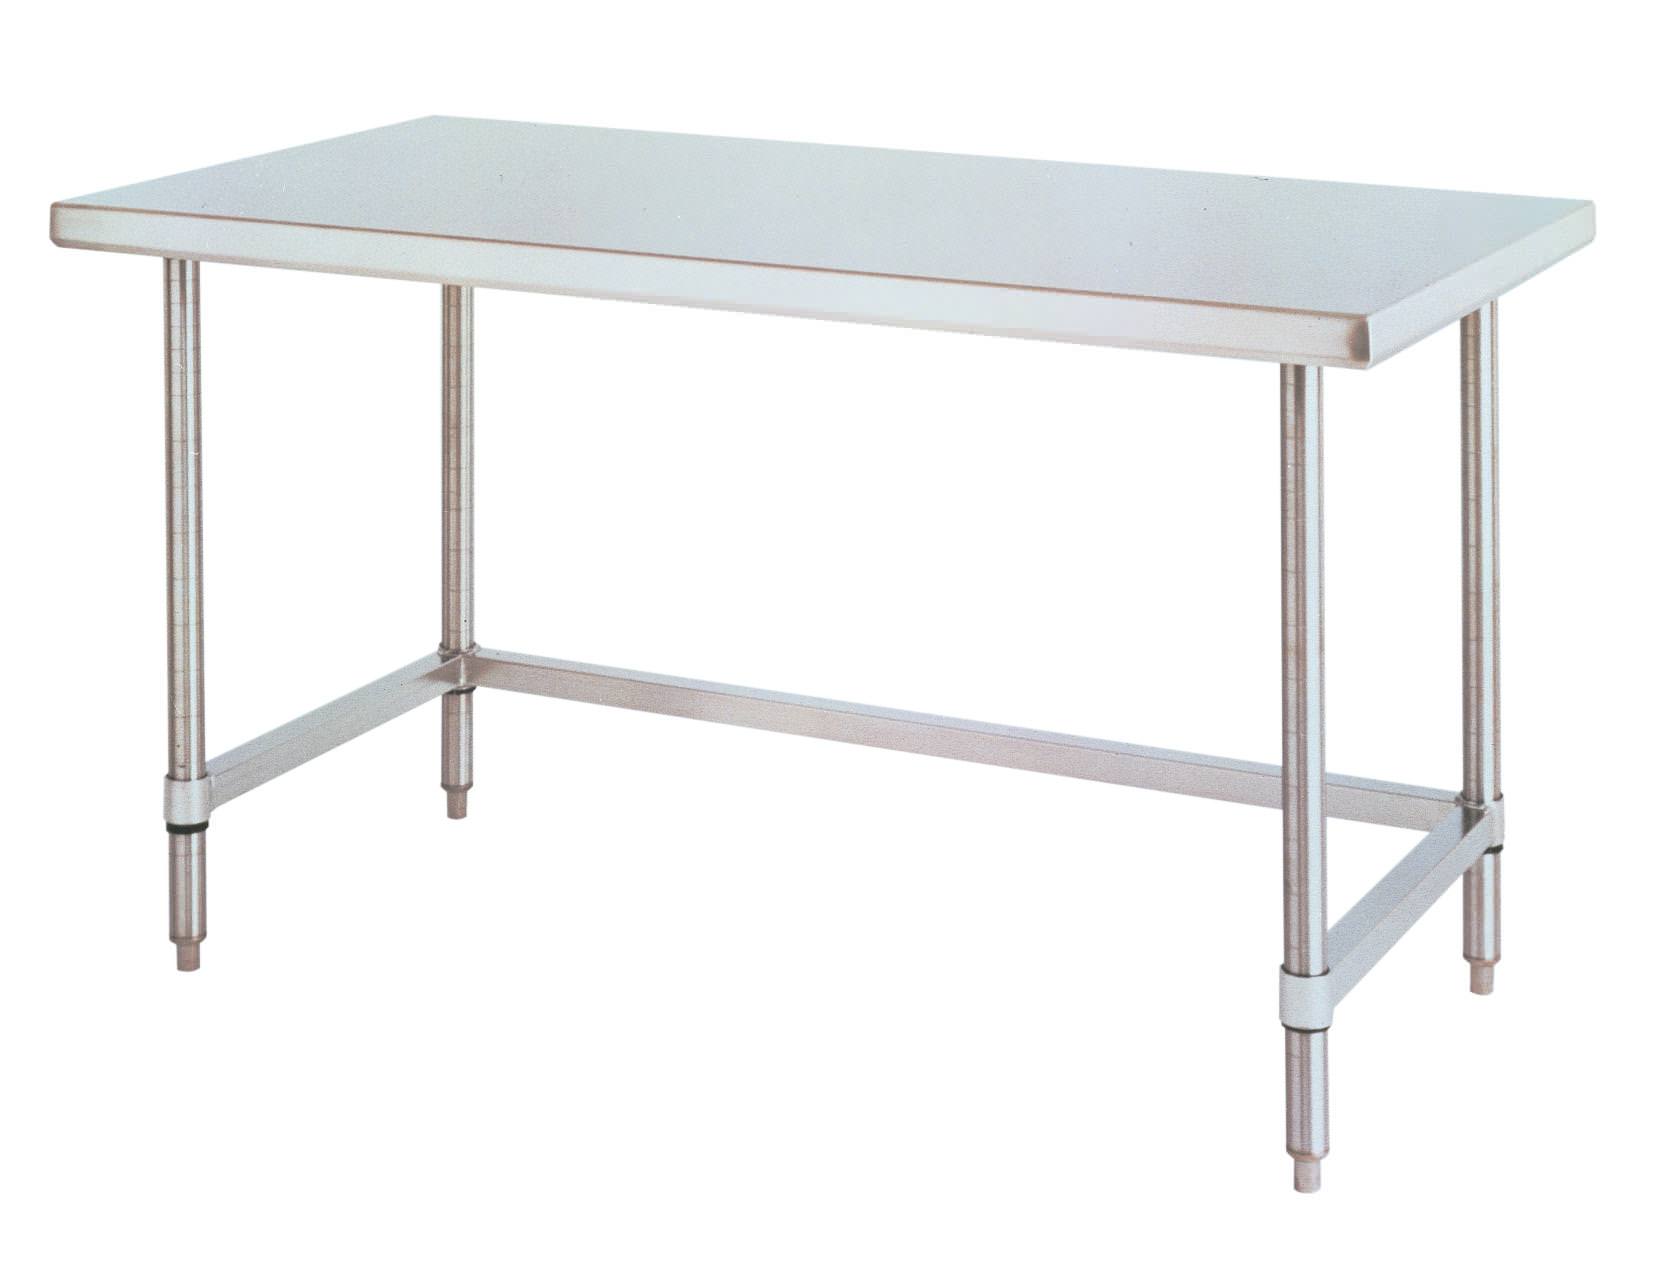 Image of: Stainless Steel Work Table 30×72